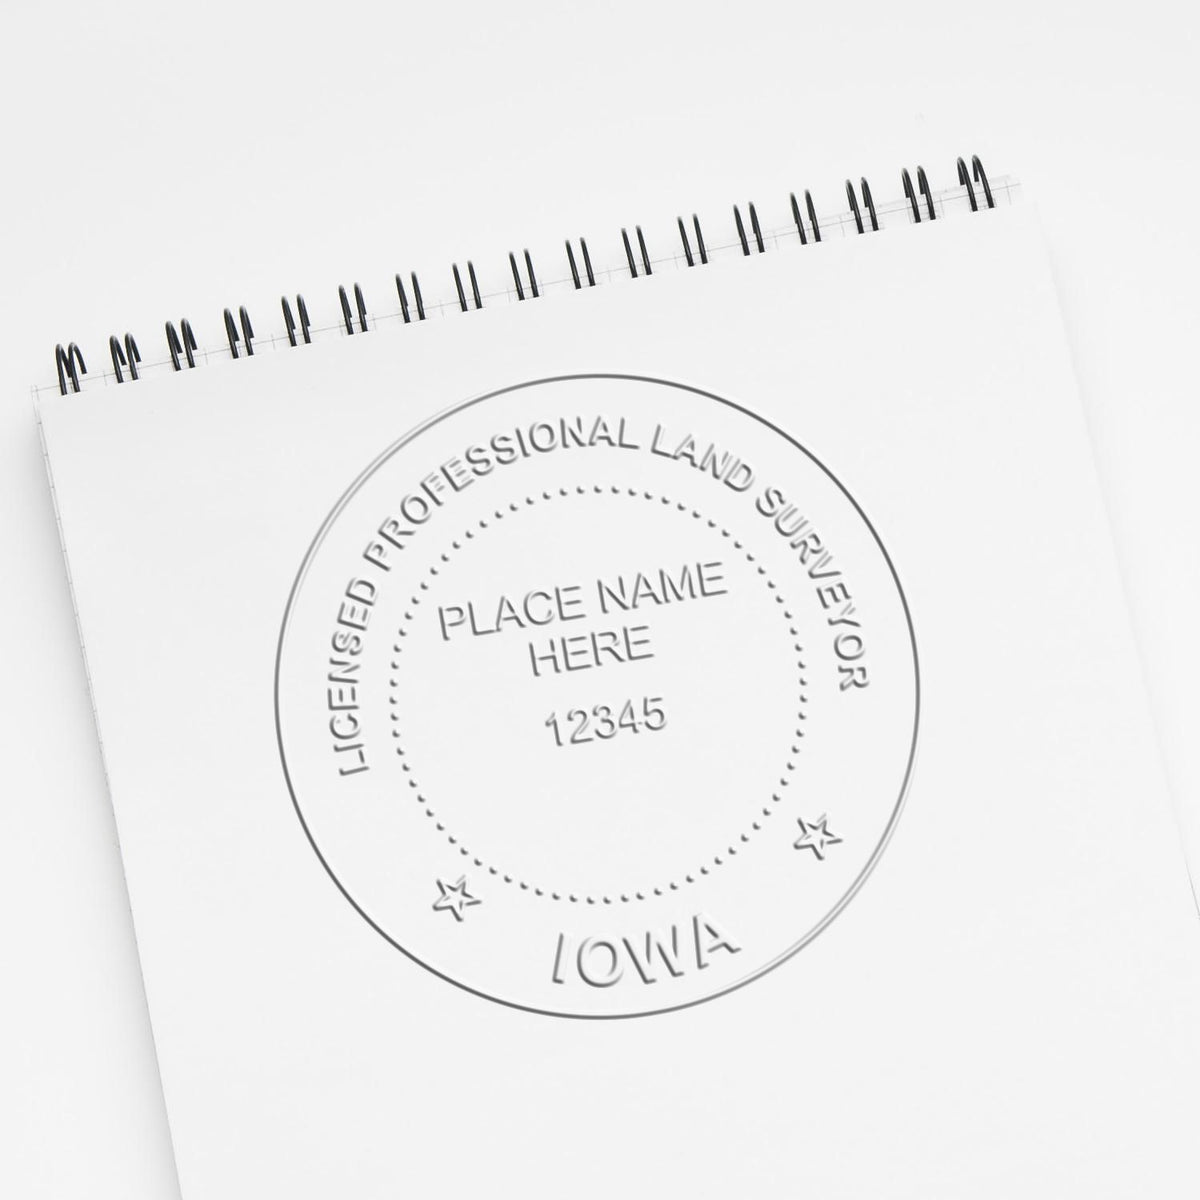 An in use photo of the Gift Iowa Land Surveyor Seal showing a sample imprint on a cardstock